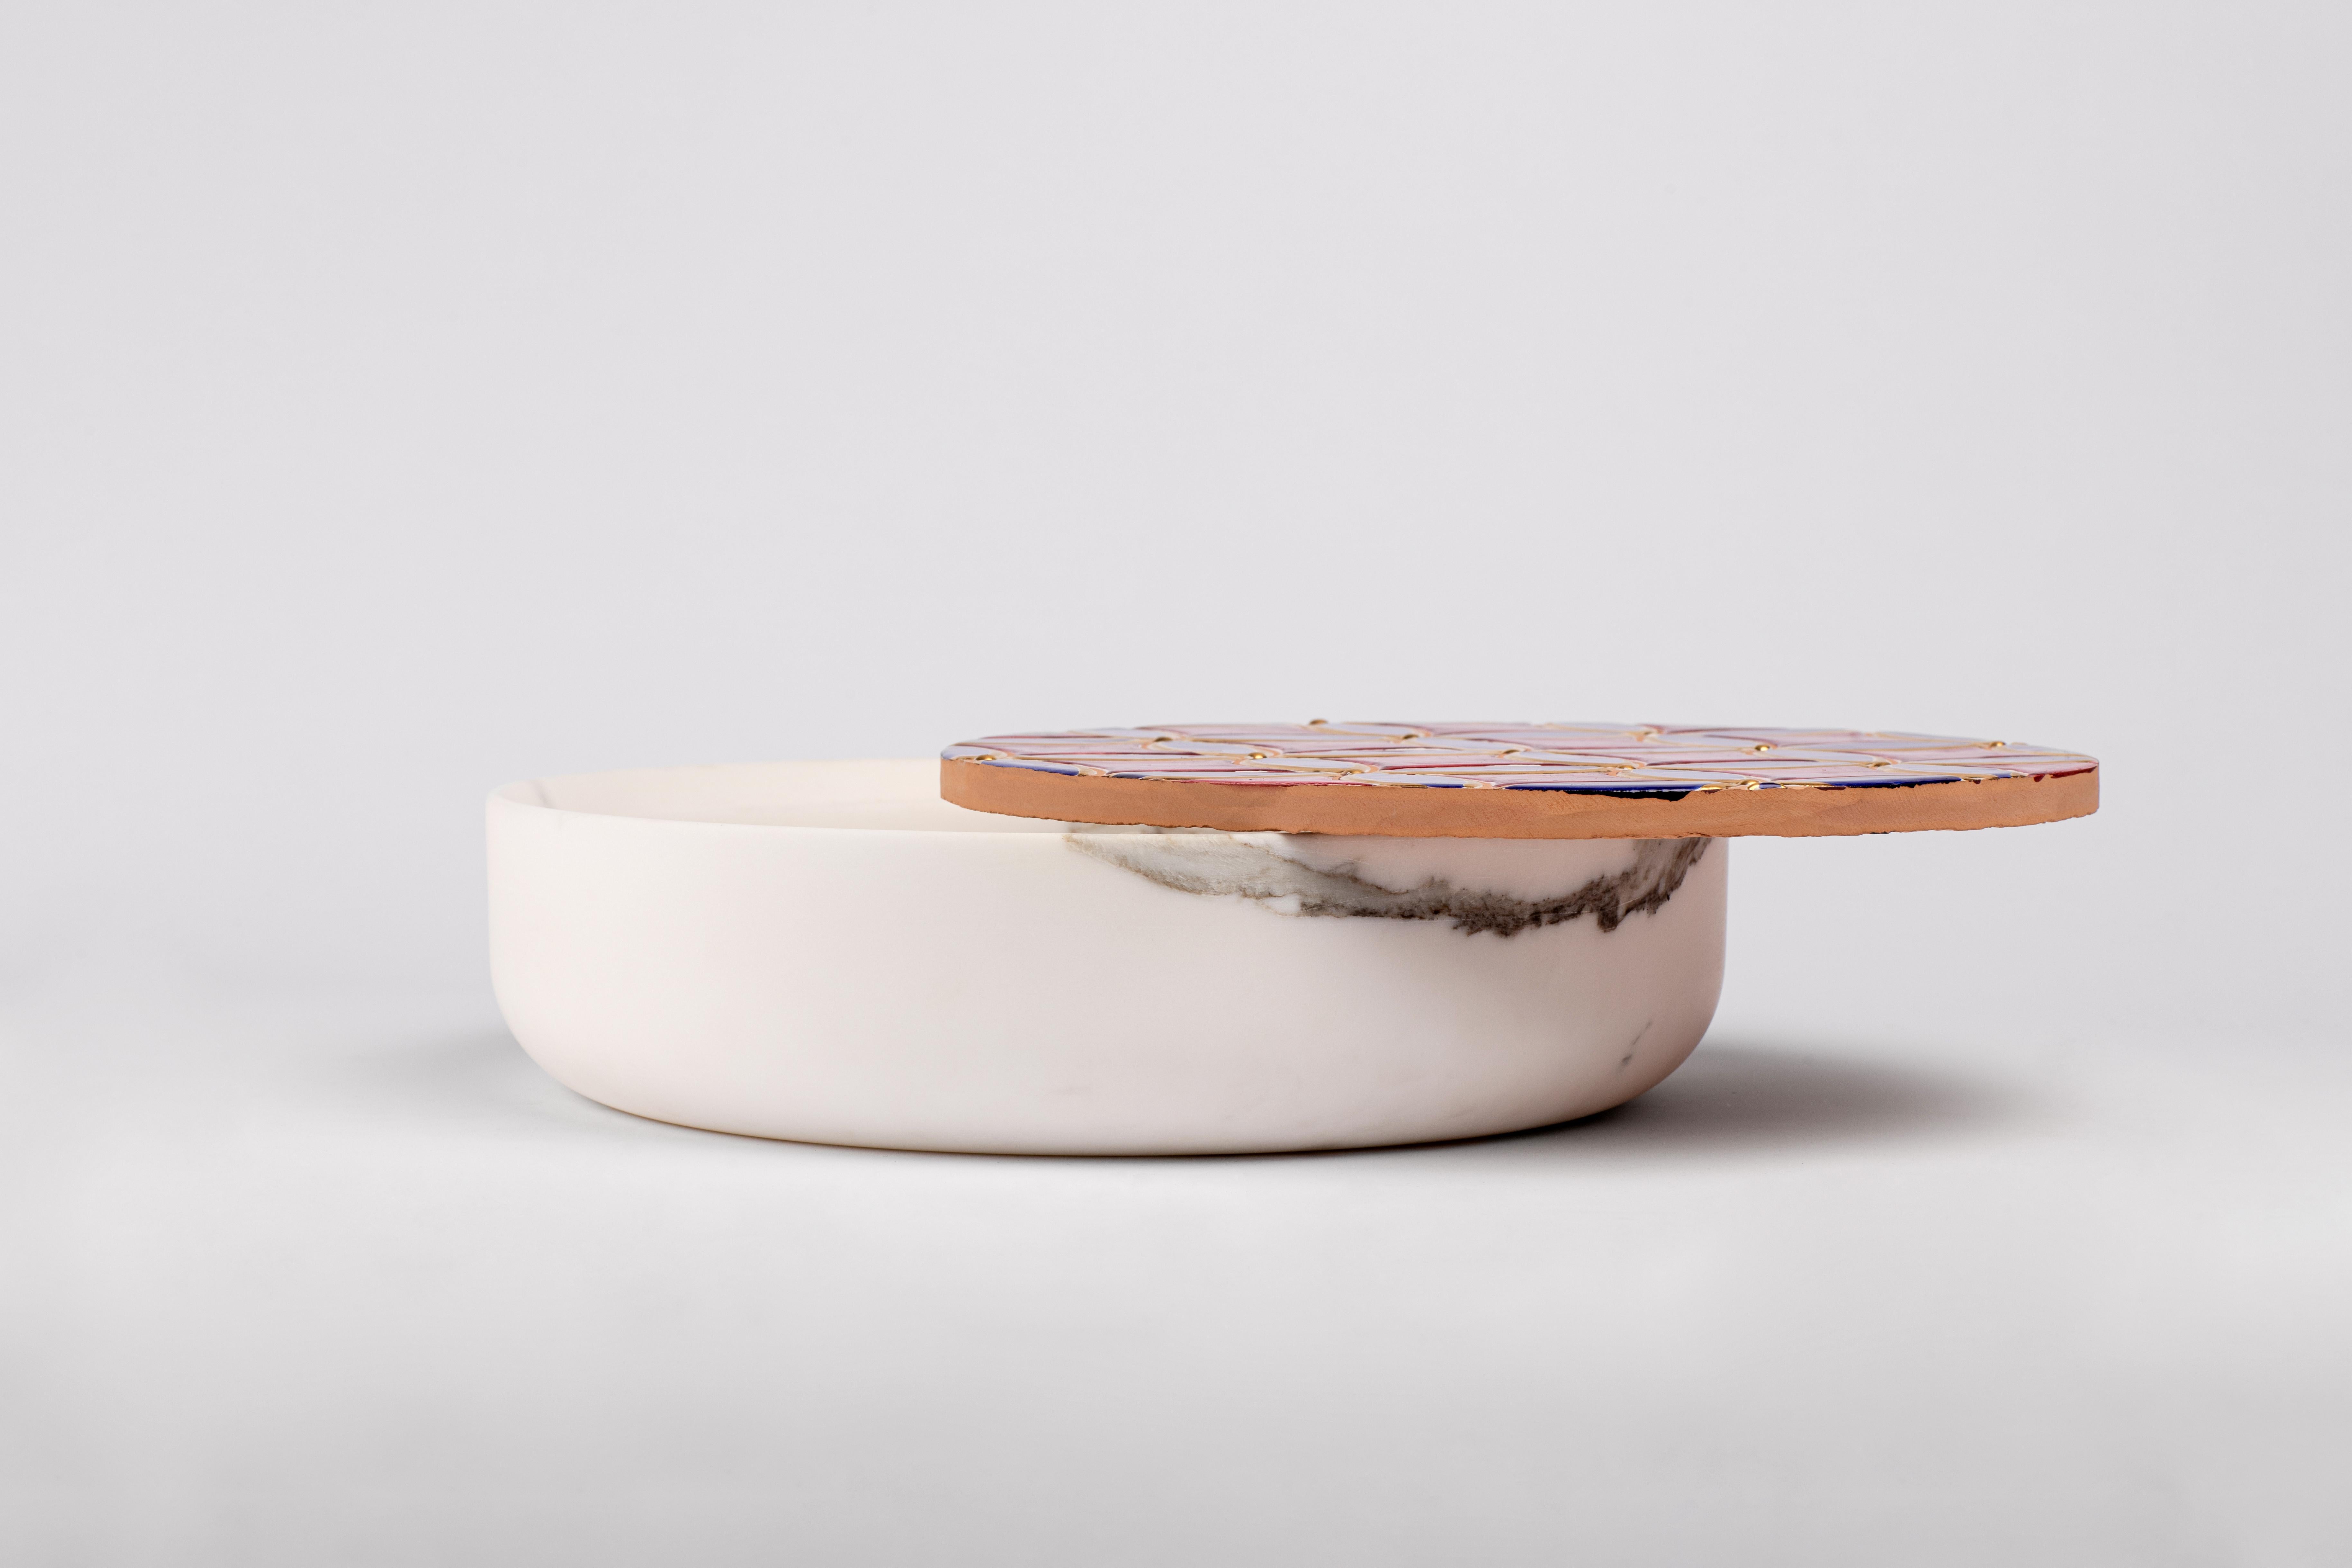 A collection made of Calacatta marble, worked on the manual lathe, and hand-glazed ceramic according to ancient Vietri traditions; two companies in the Neapolitan area that attribute production excellence, the search for materials, the unique and